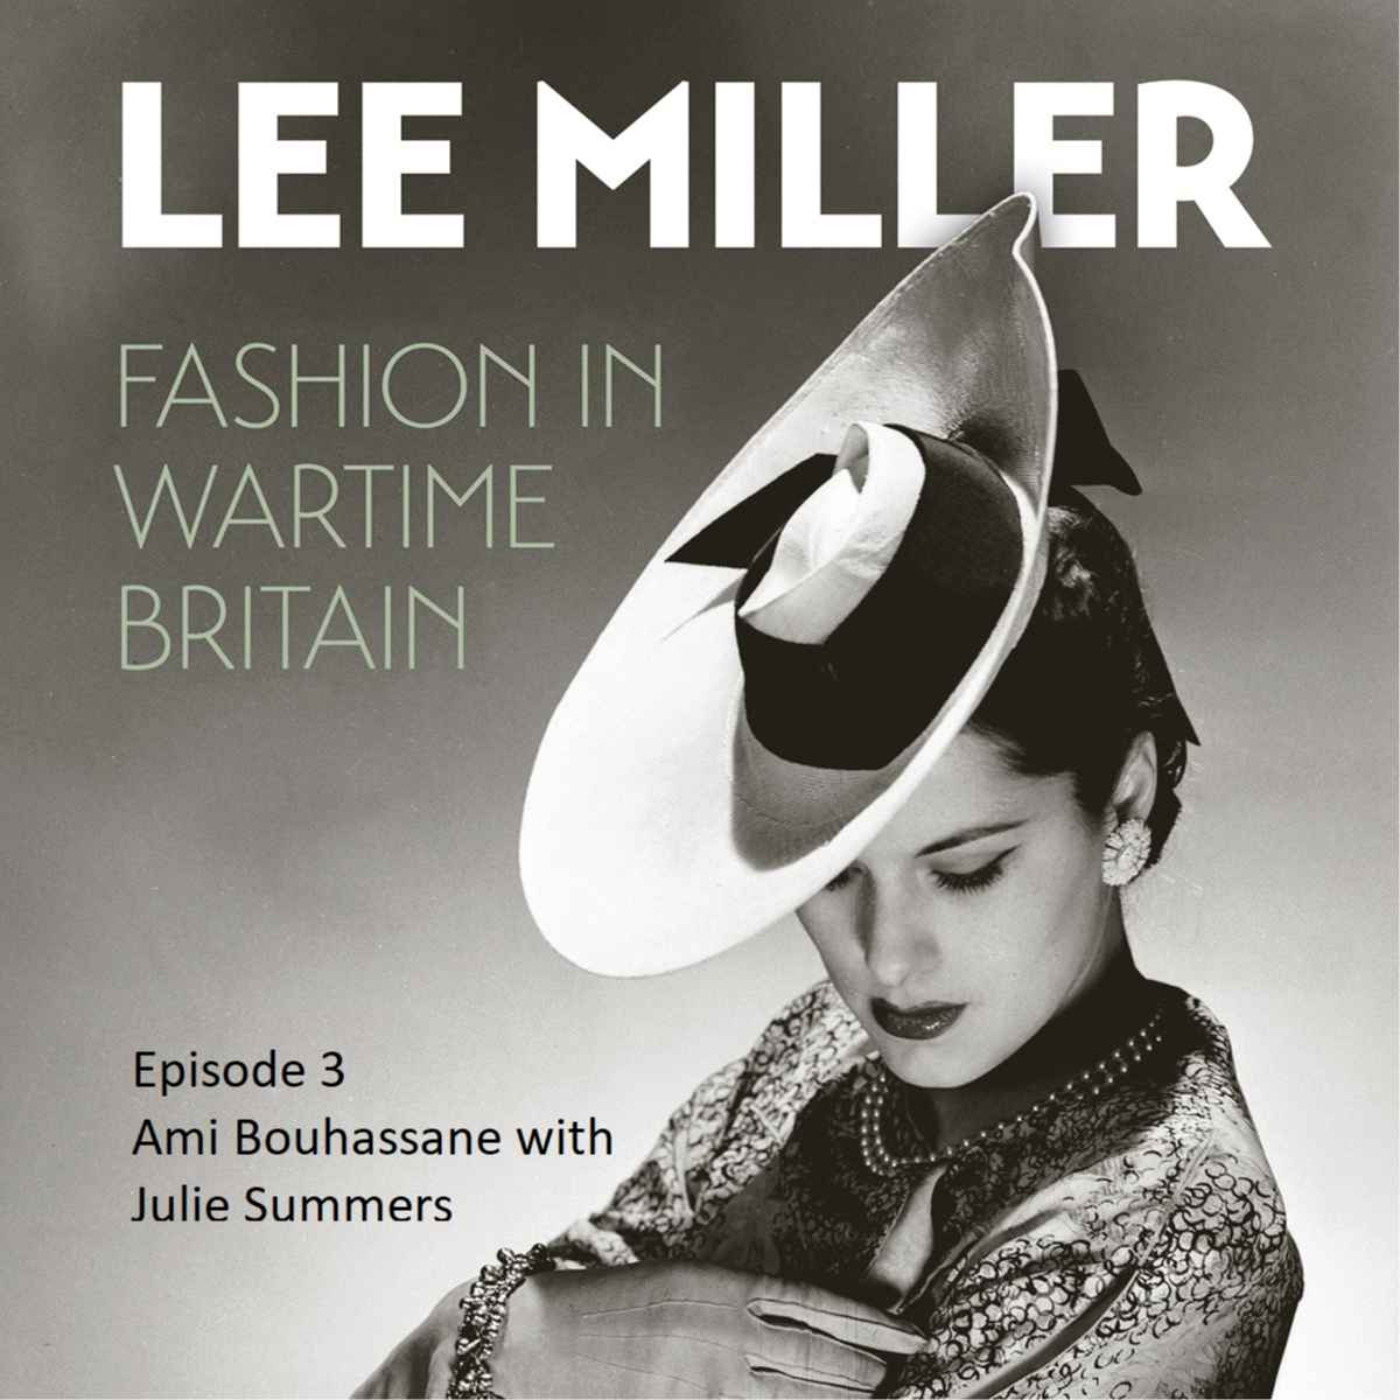 cover art for Audrey Withers, Lee Miller's wartime editor 